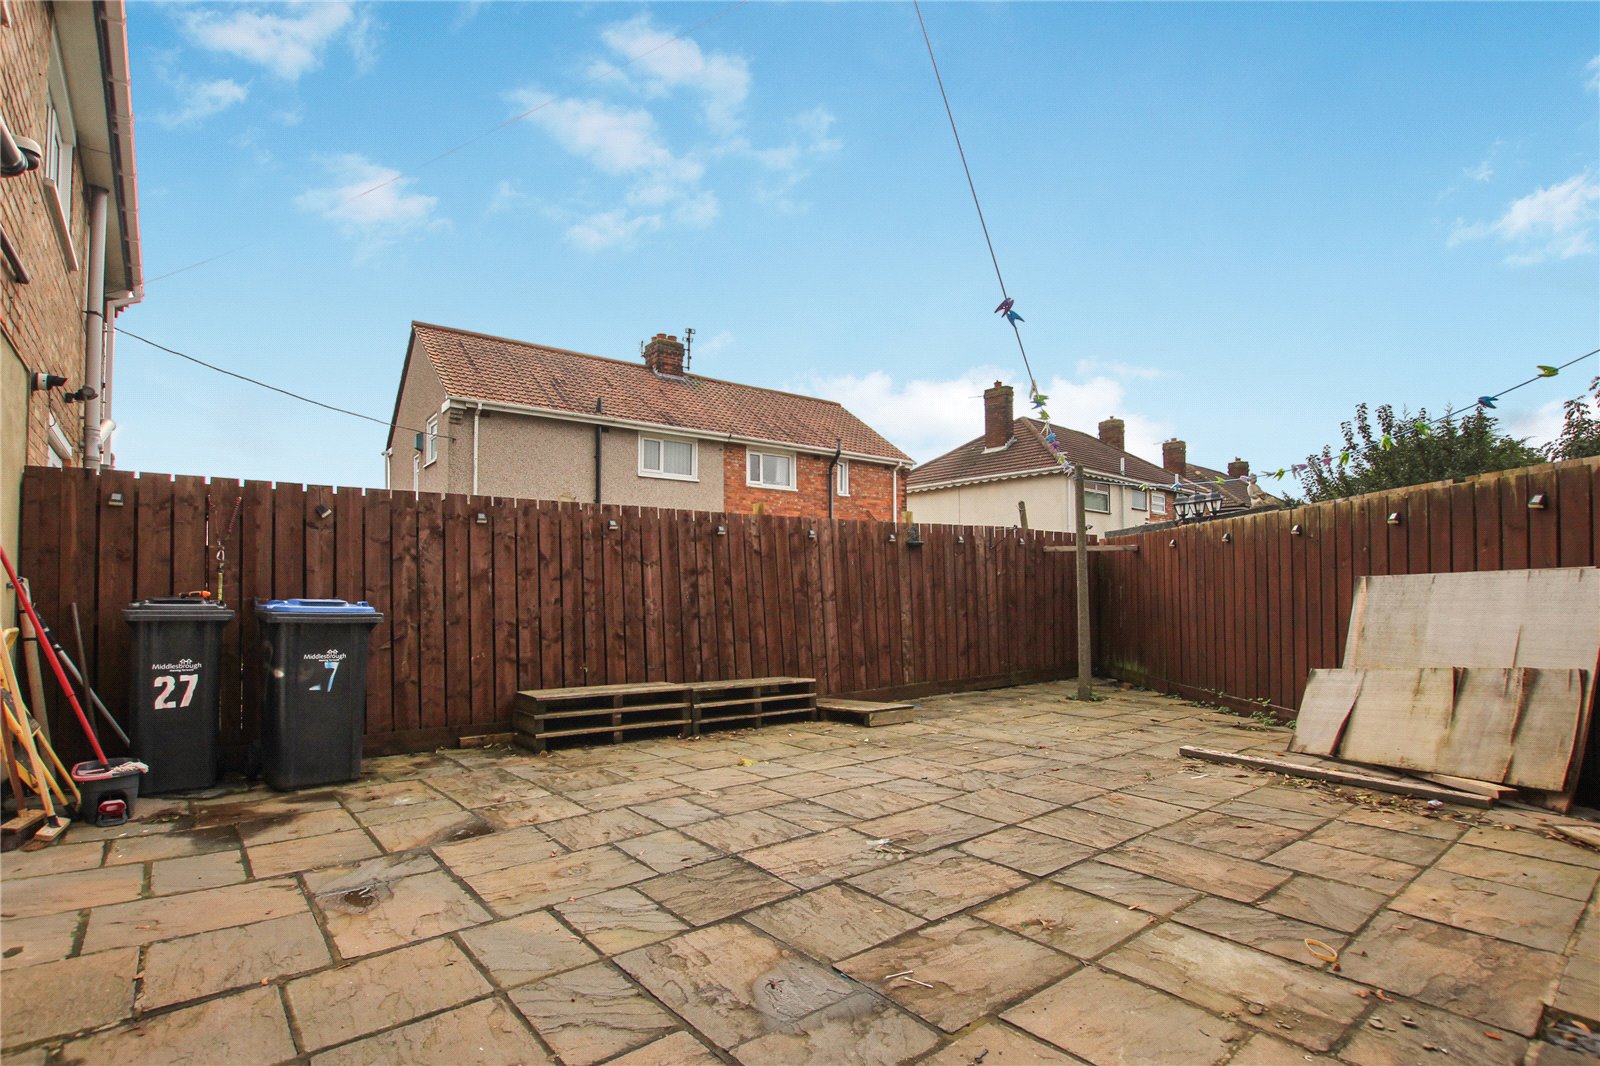 3 bed  for sale  - Property Image 17